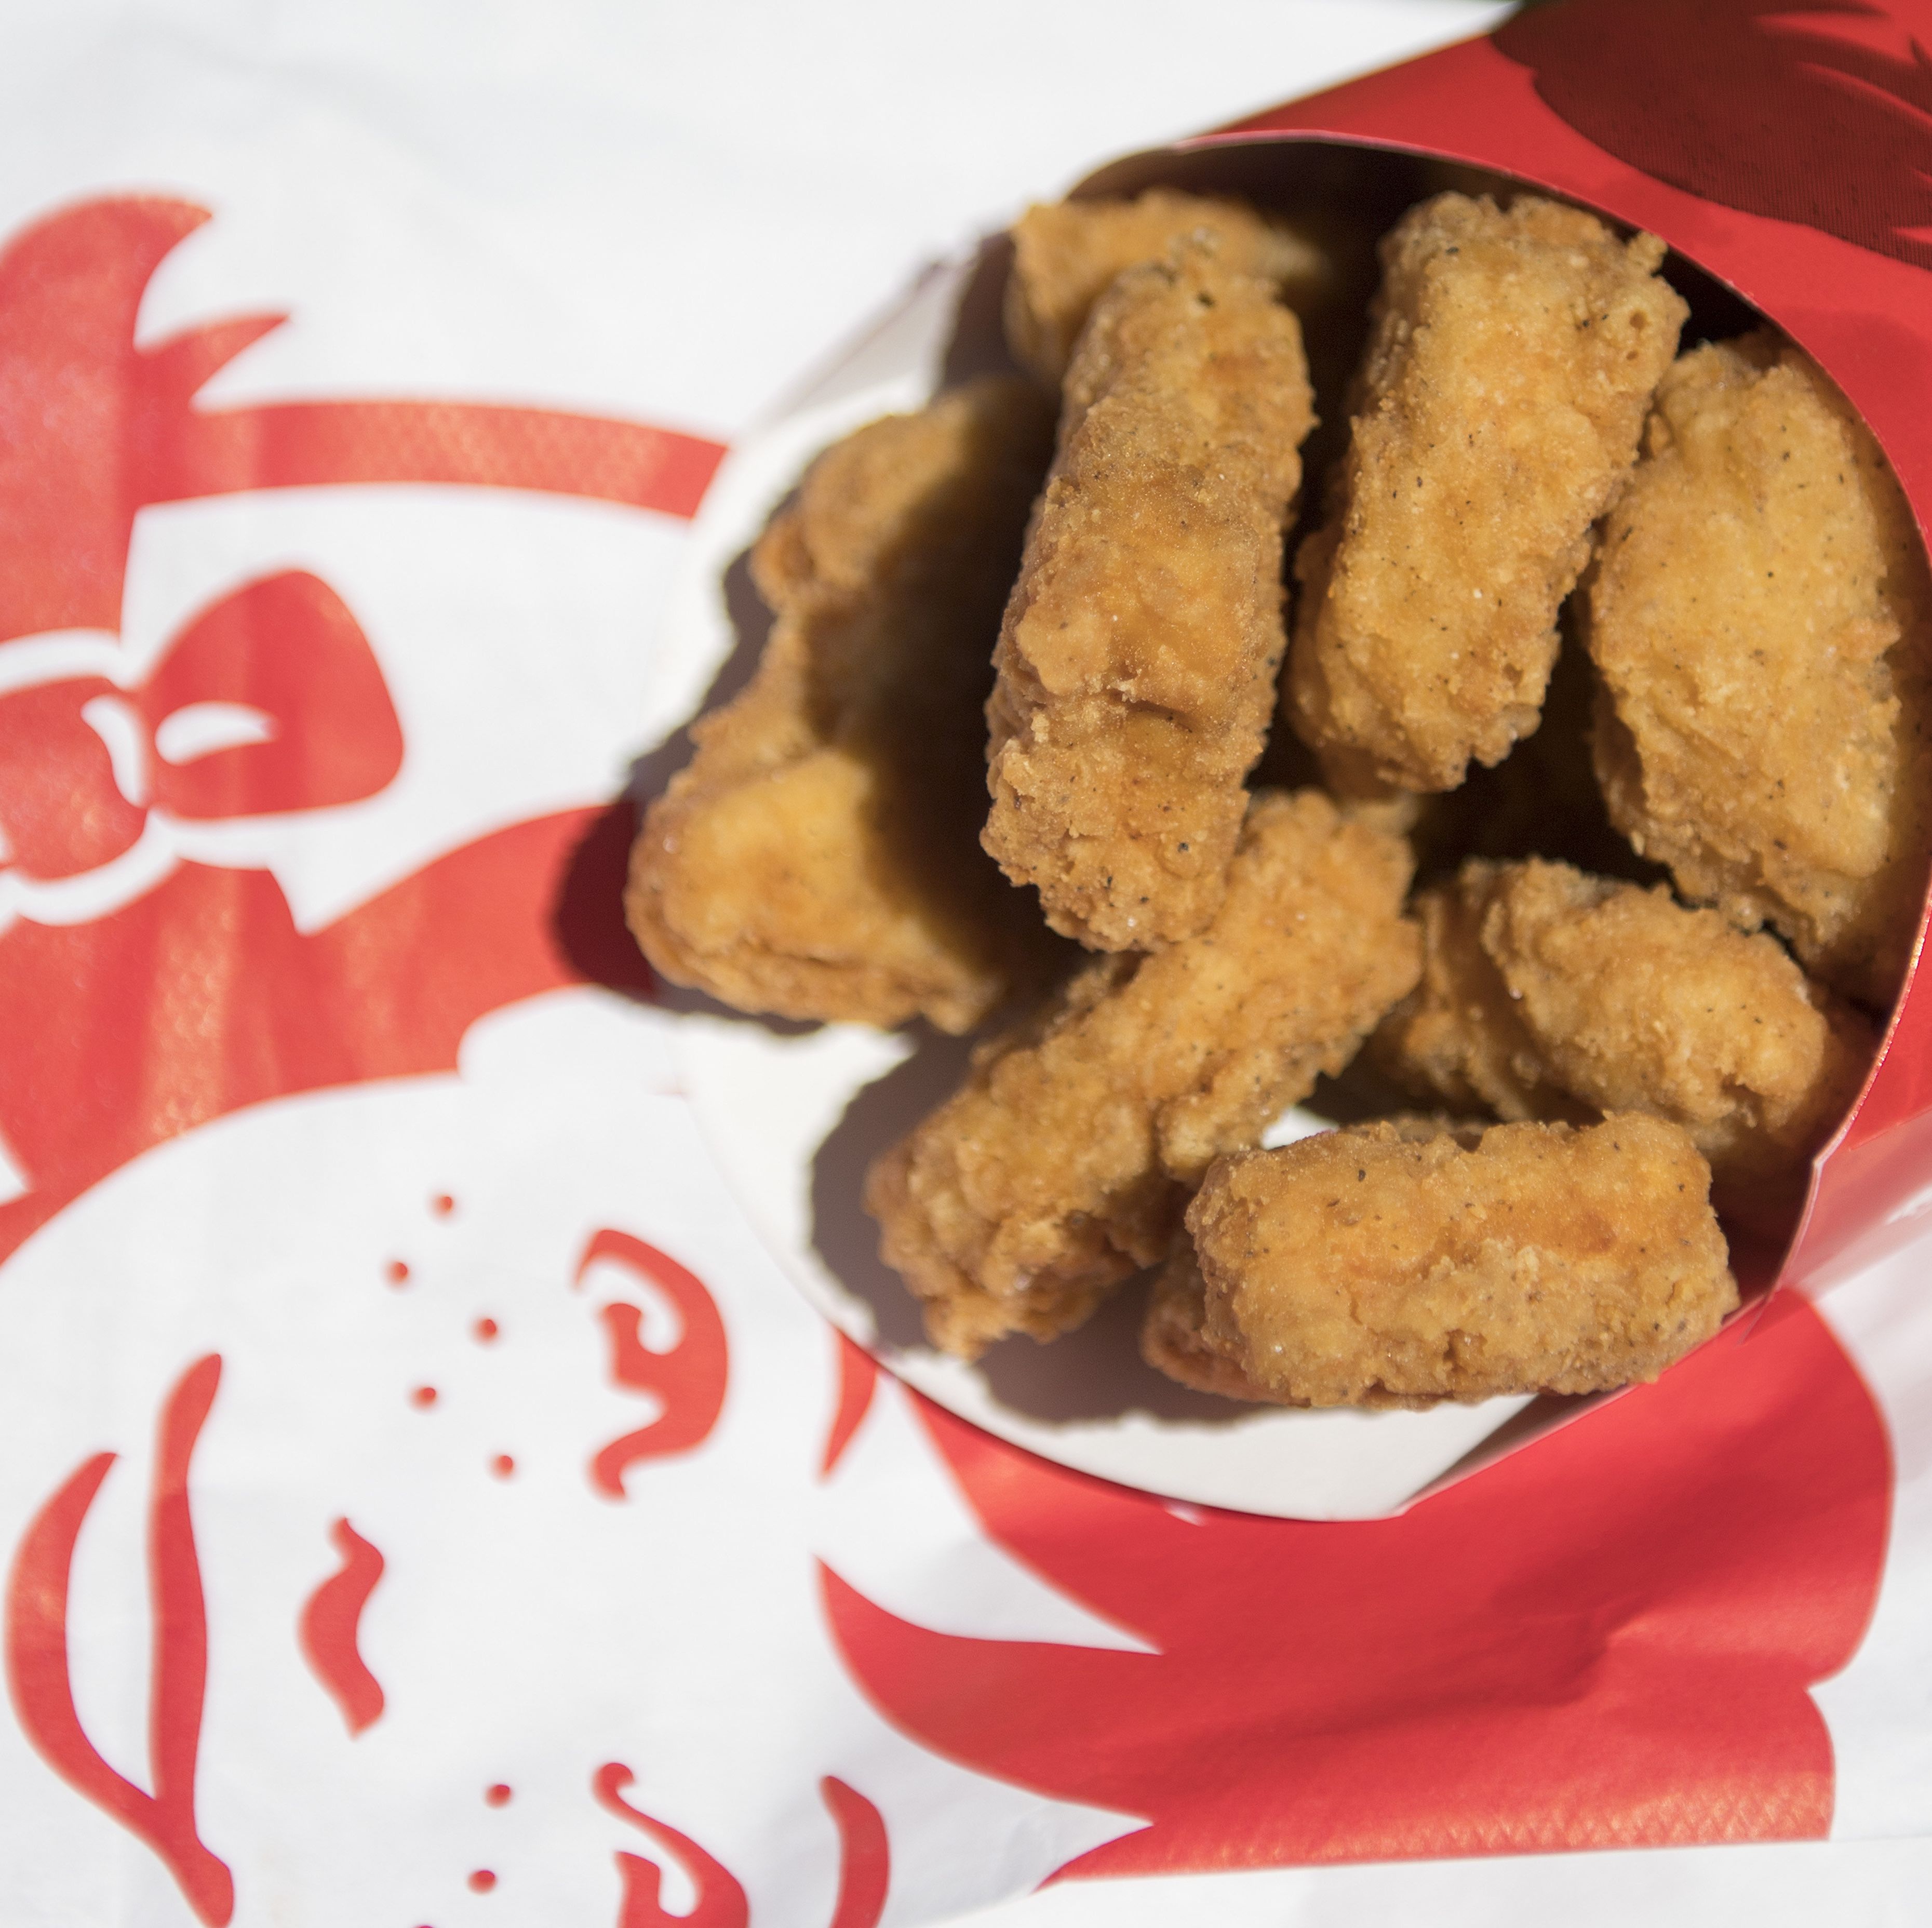 You Can Score Free Nuggets & Sandwiches At Wendy's This Halloween